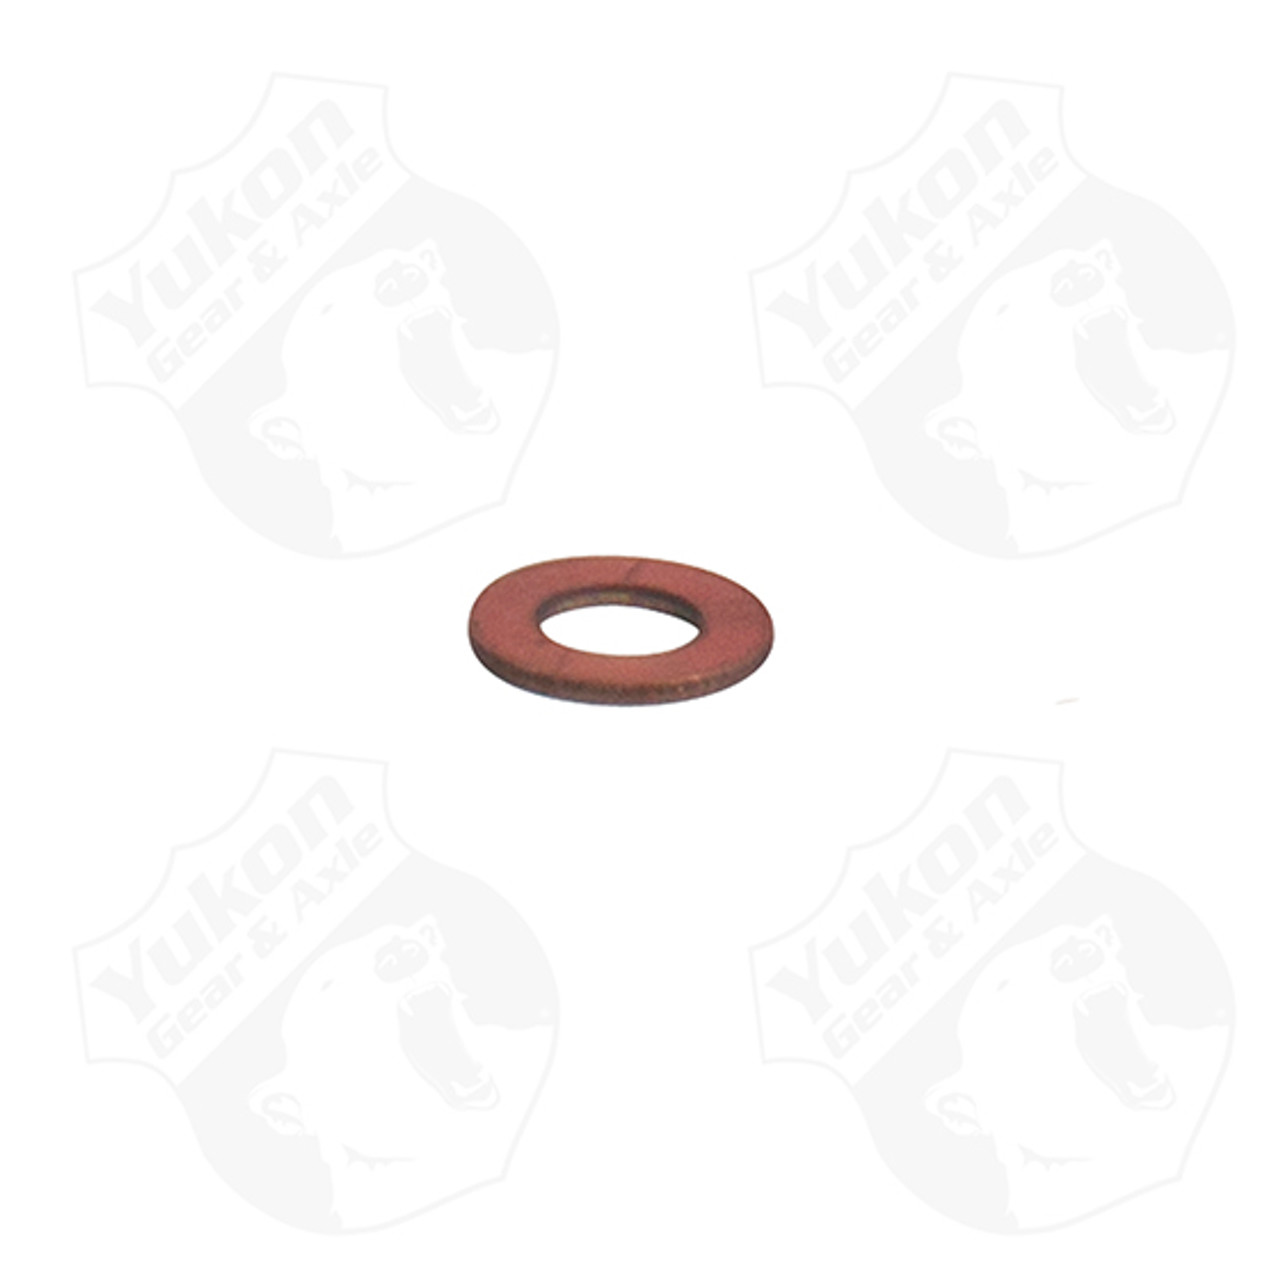 Copper washer for Ford 9" & 8" dropout housing